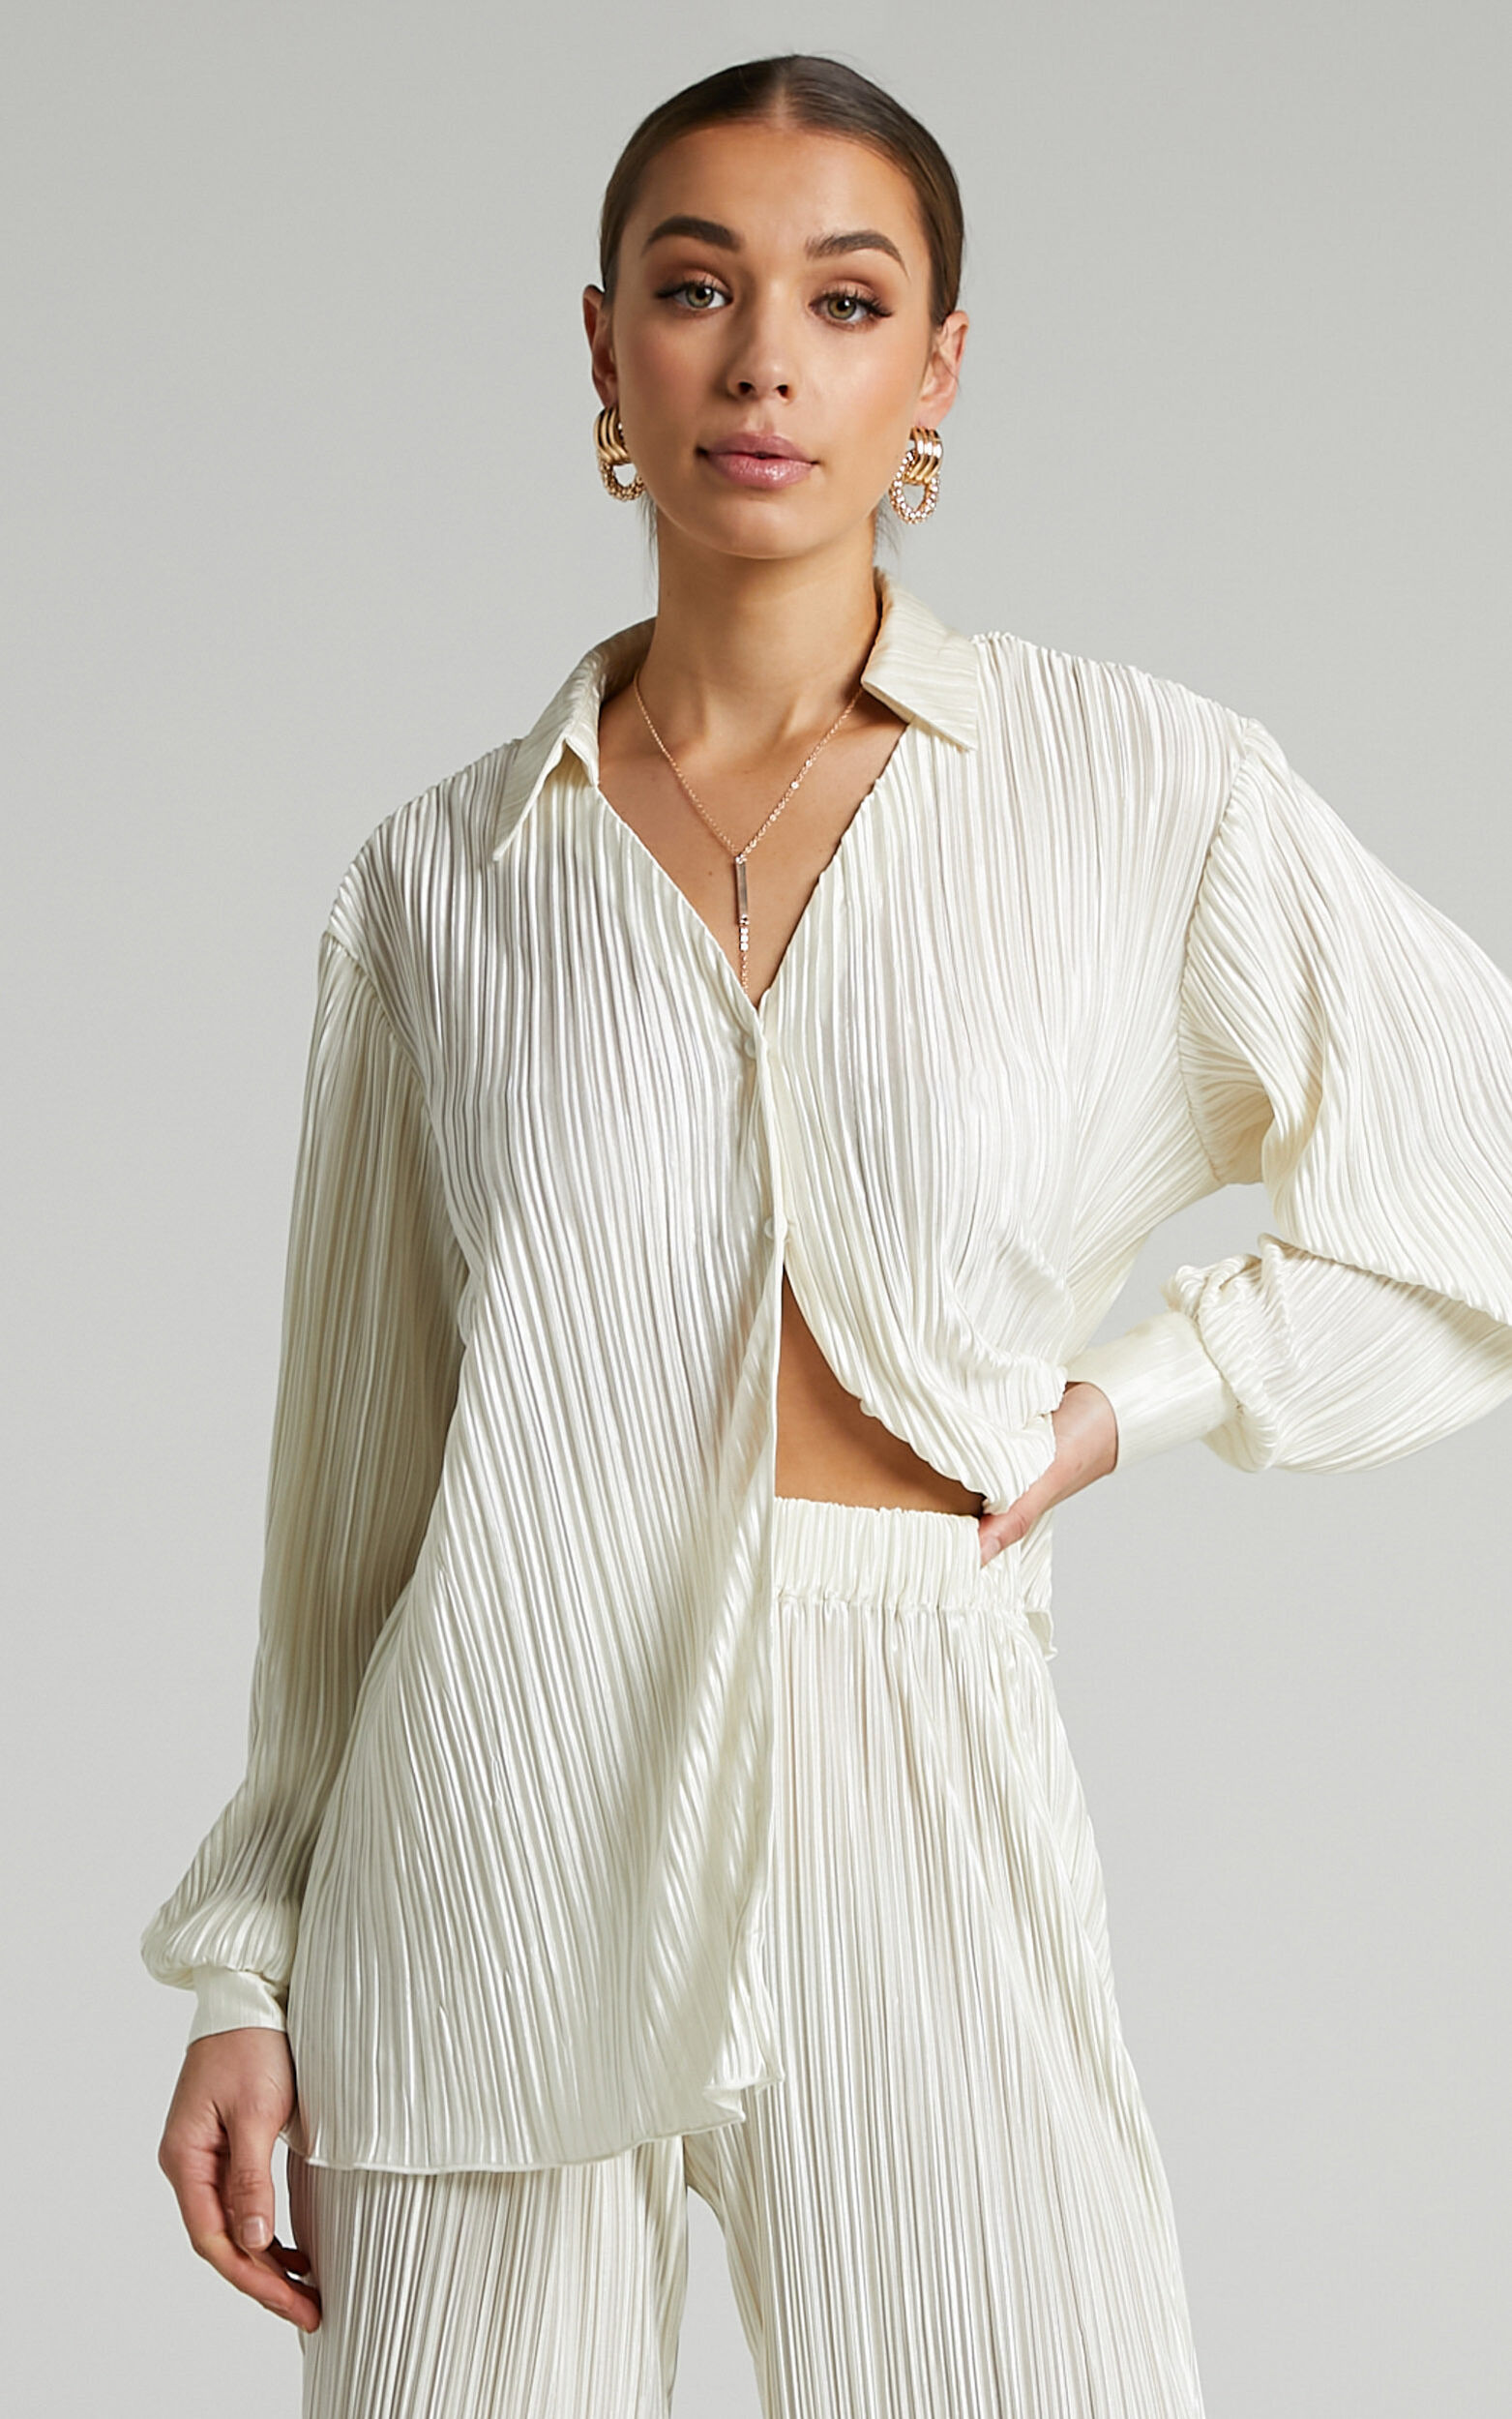 Beca Shirt - Plisse Button Up Shirt in Cream - 06, CRE1